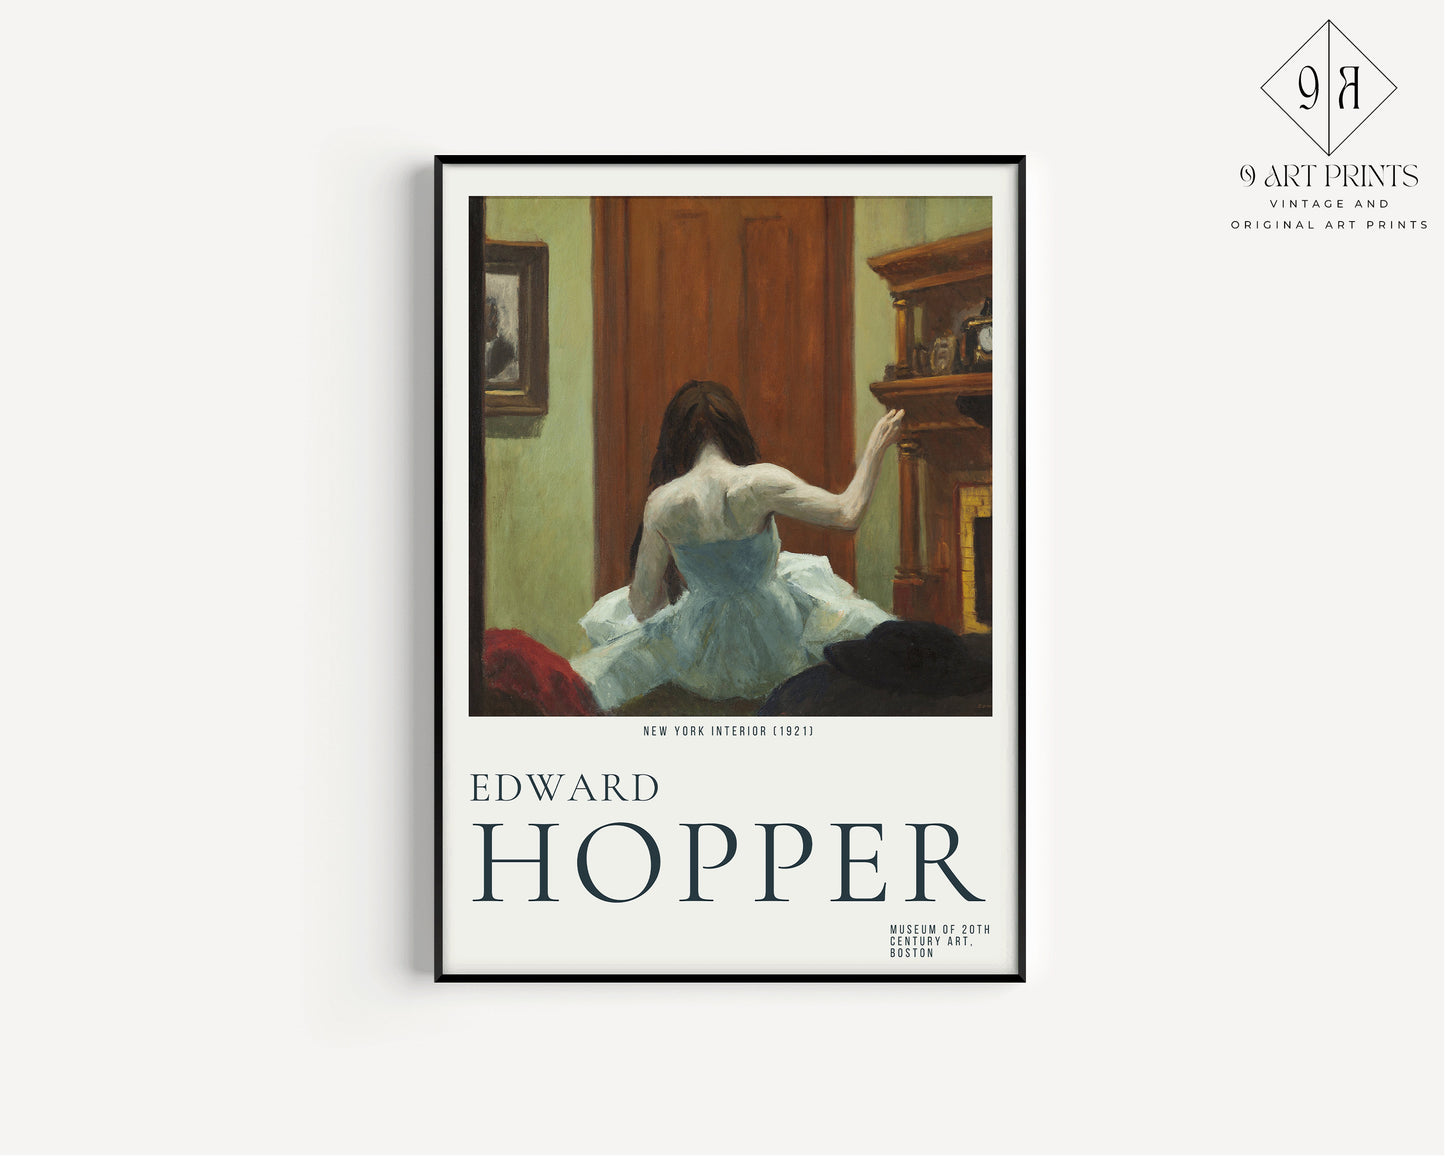 Set of 2 Edward Hopper Prints New York Interior Hotel Room Museum Exhibition Poster American Realist Framed Ready to Hang Home Office Decor